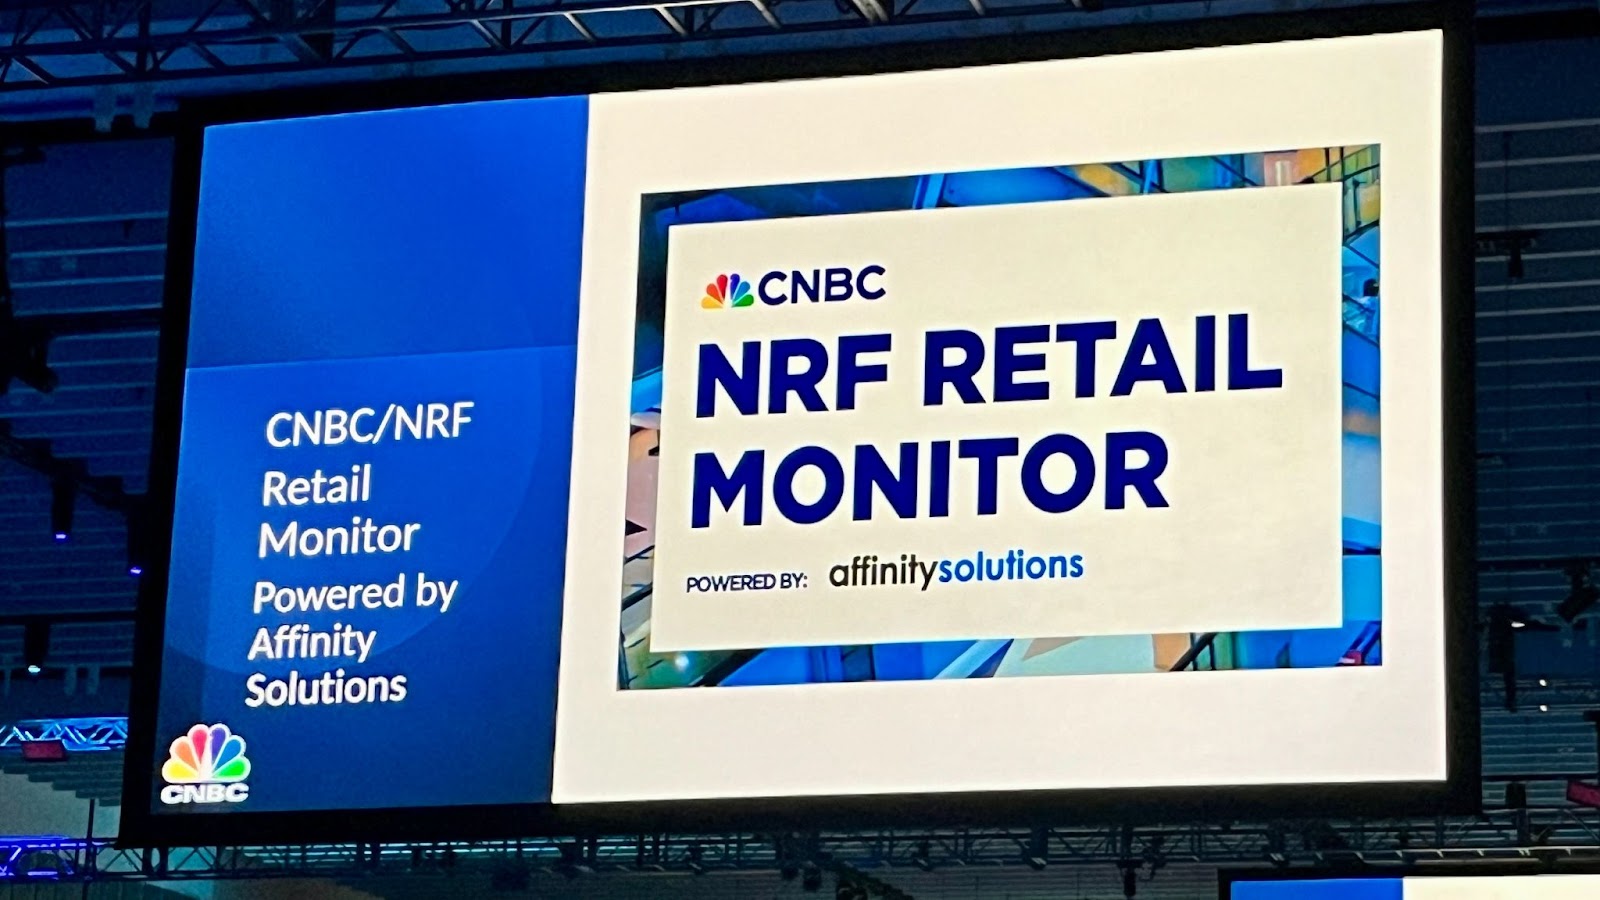 Liesman concluded his session by introducing the CNBC/NRF Retail Monitor, powered by Affinity Solutions, as a valuable tool for forecasting.